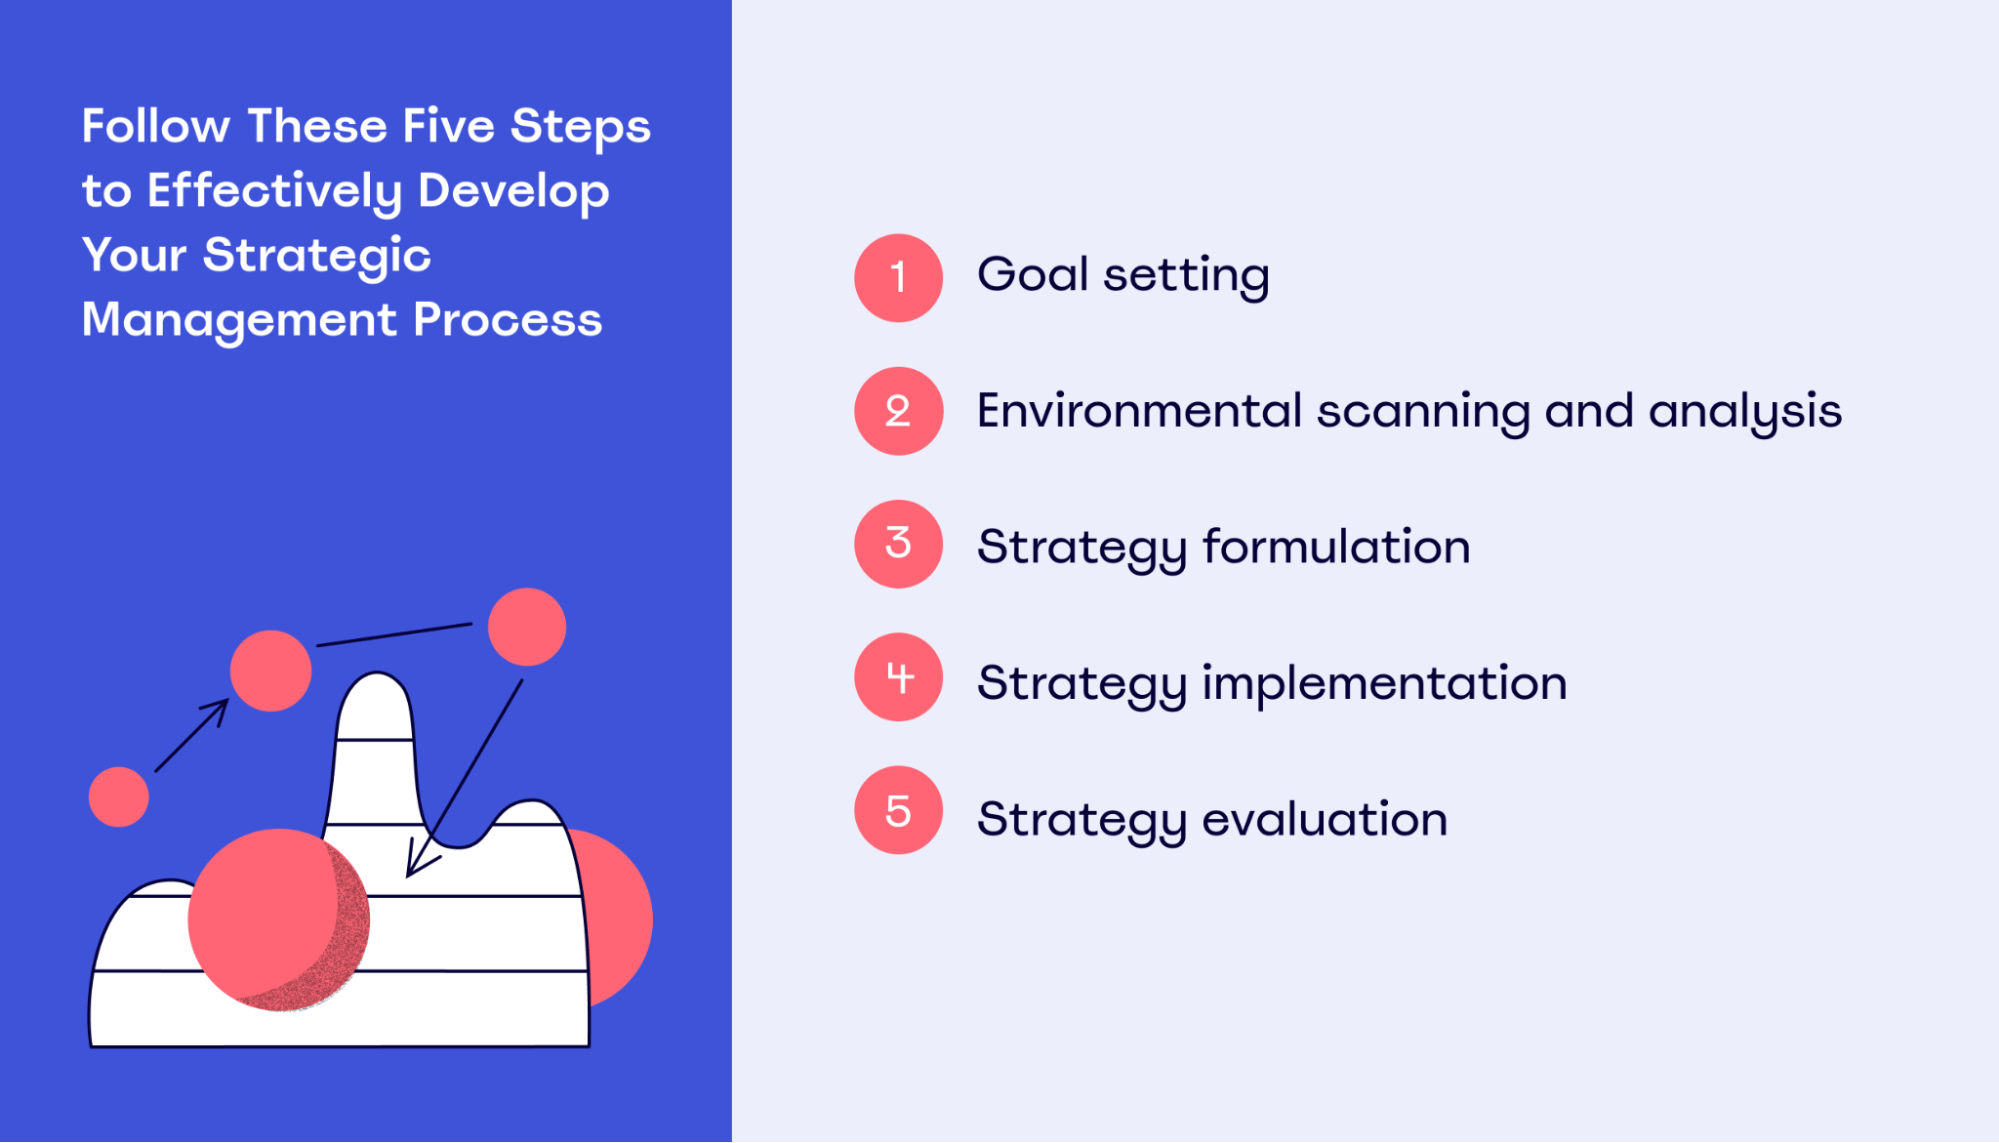 The 5 steps of the strategic management process